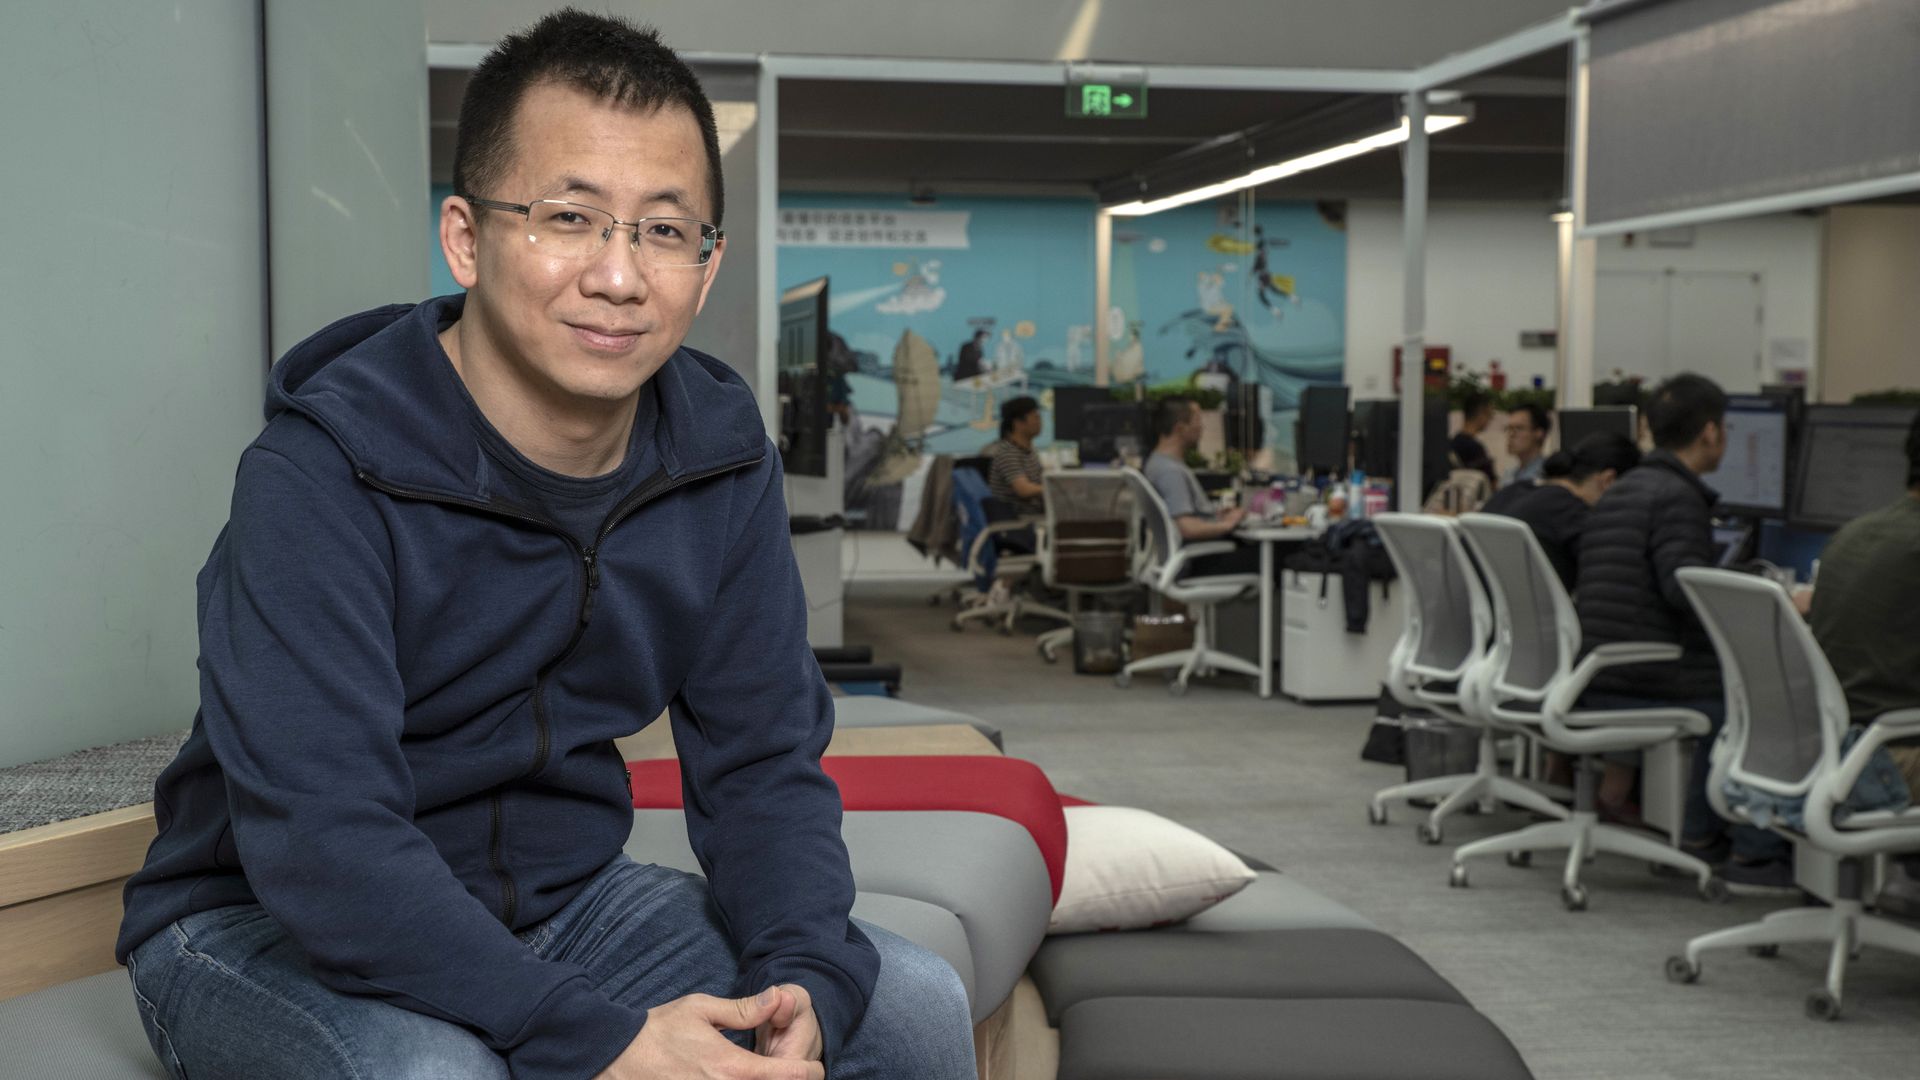 Bytedance CEO Zhang Yiming posing for a photograph in an office with people sitting at desks